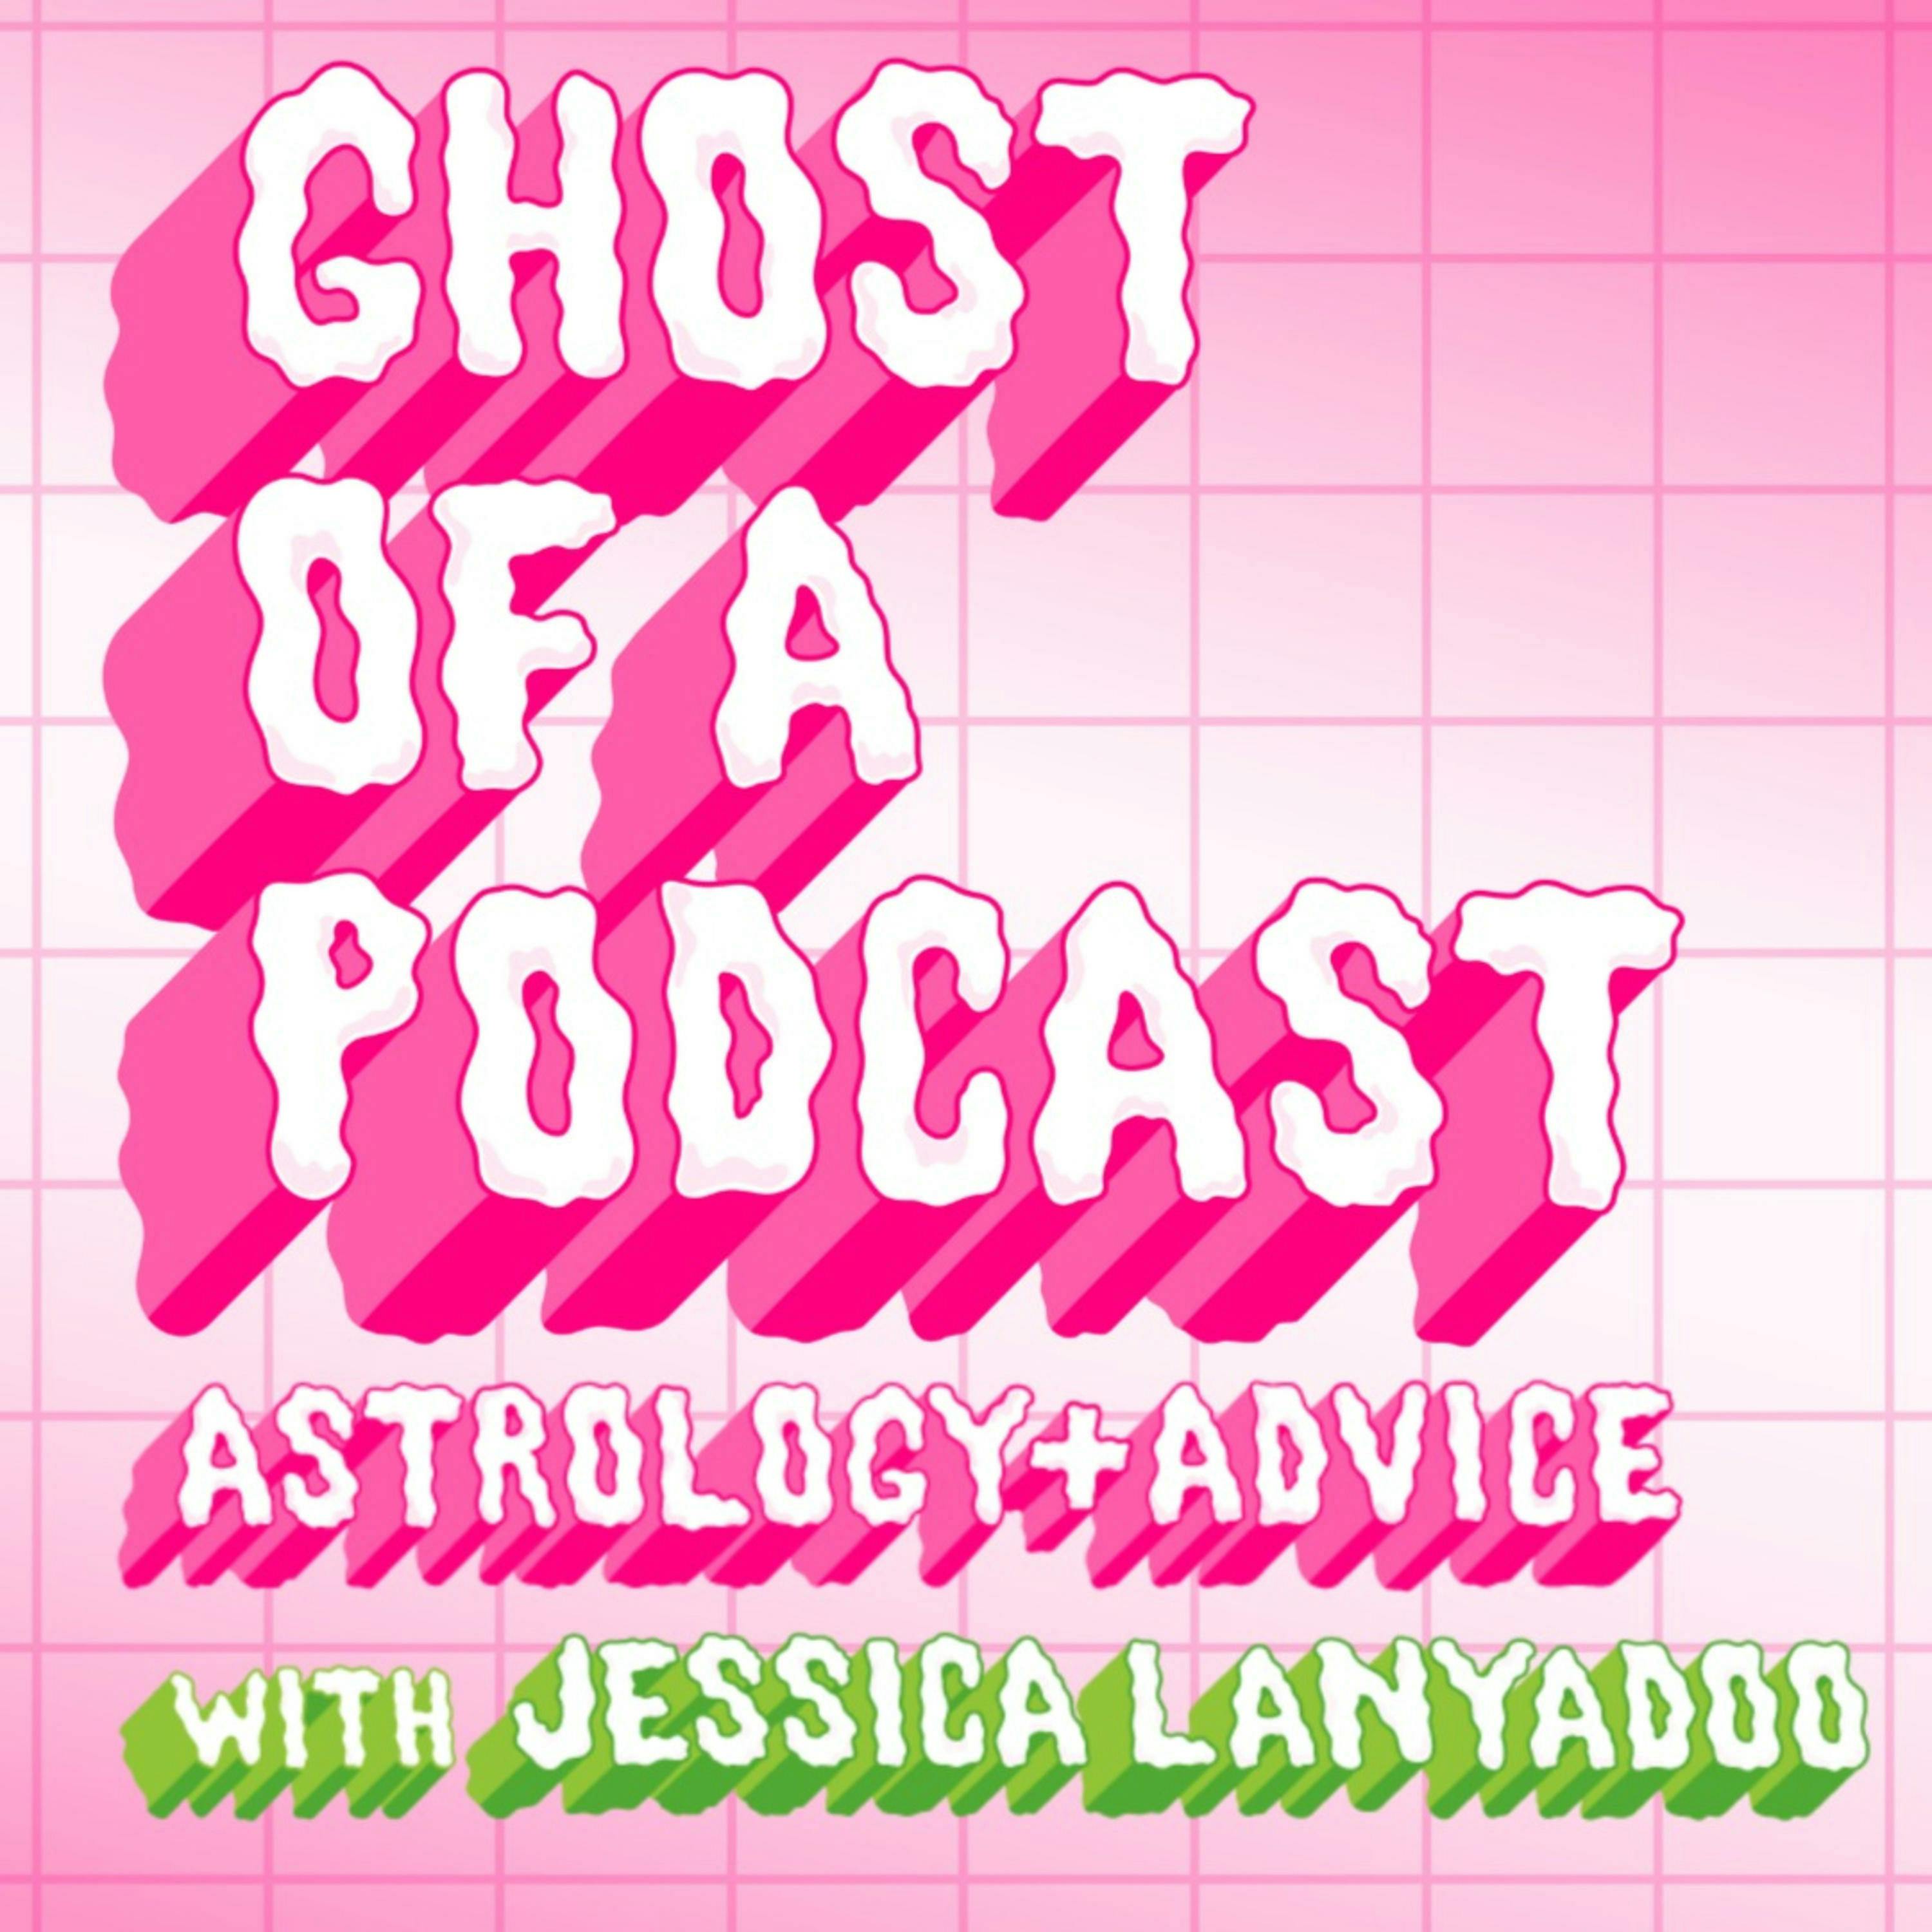 138: The 4th House + Astrology